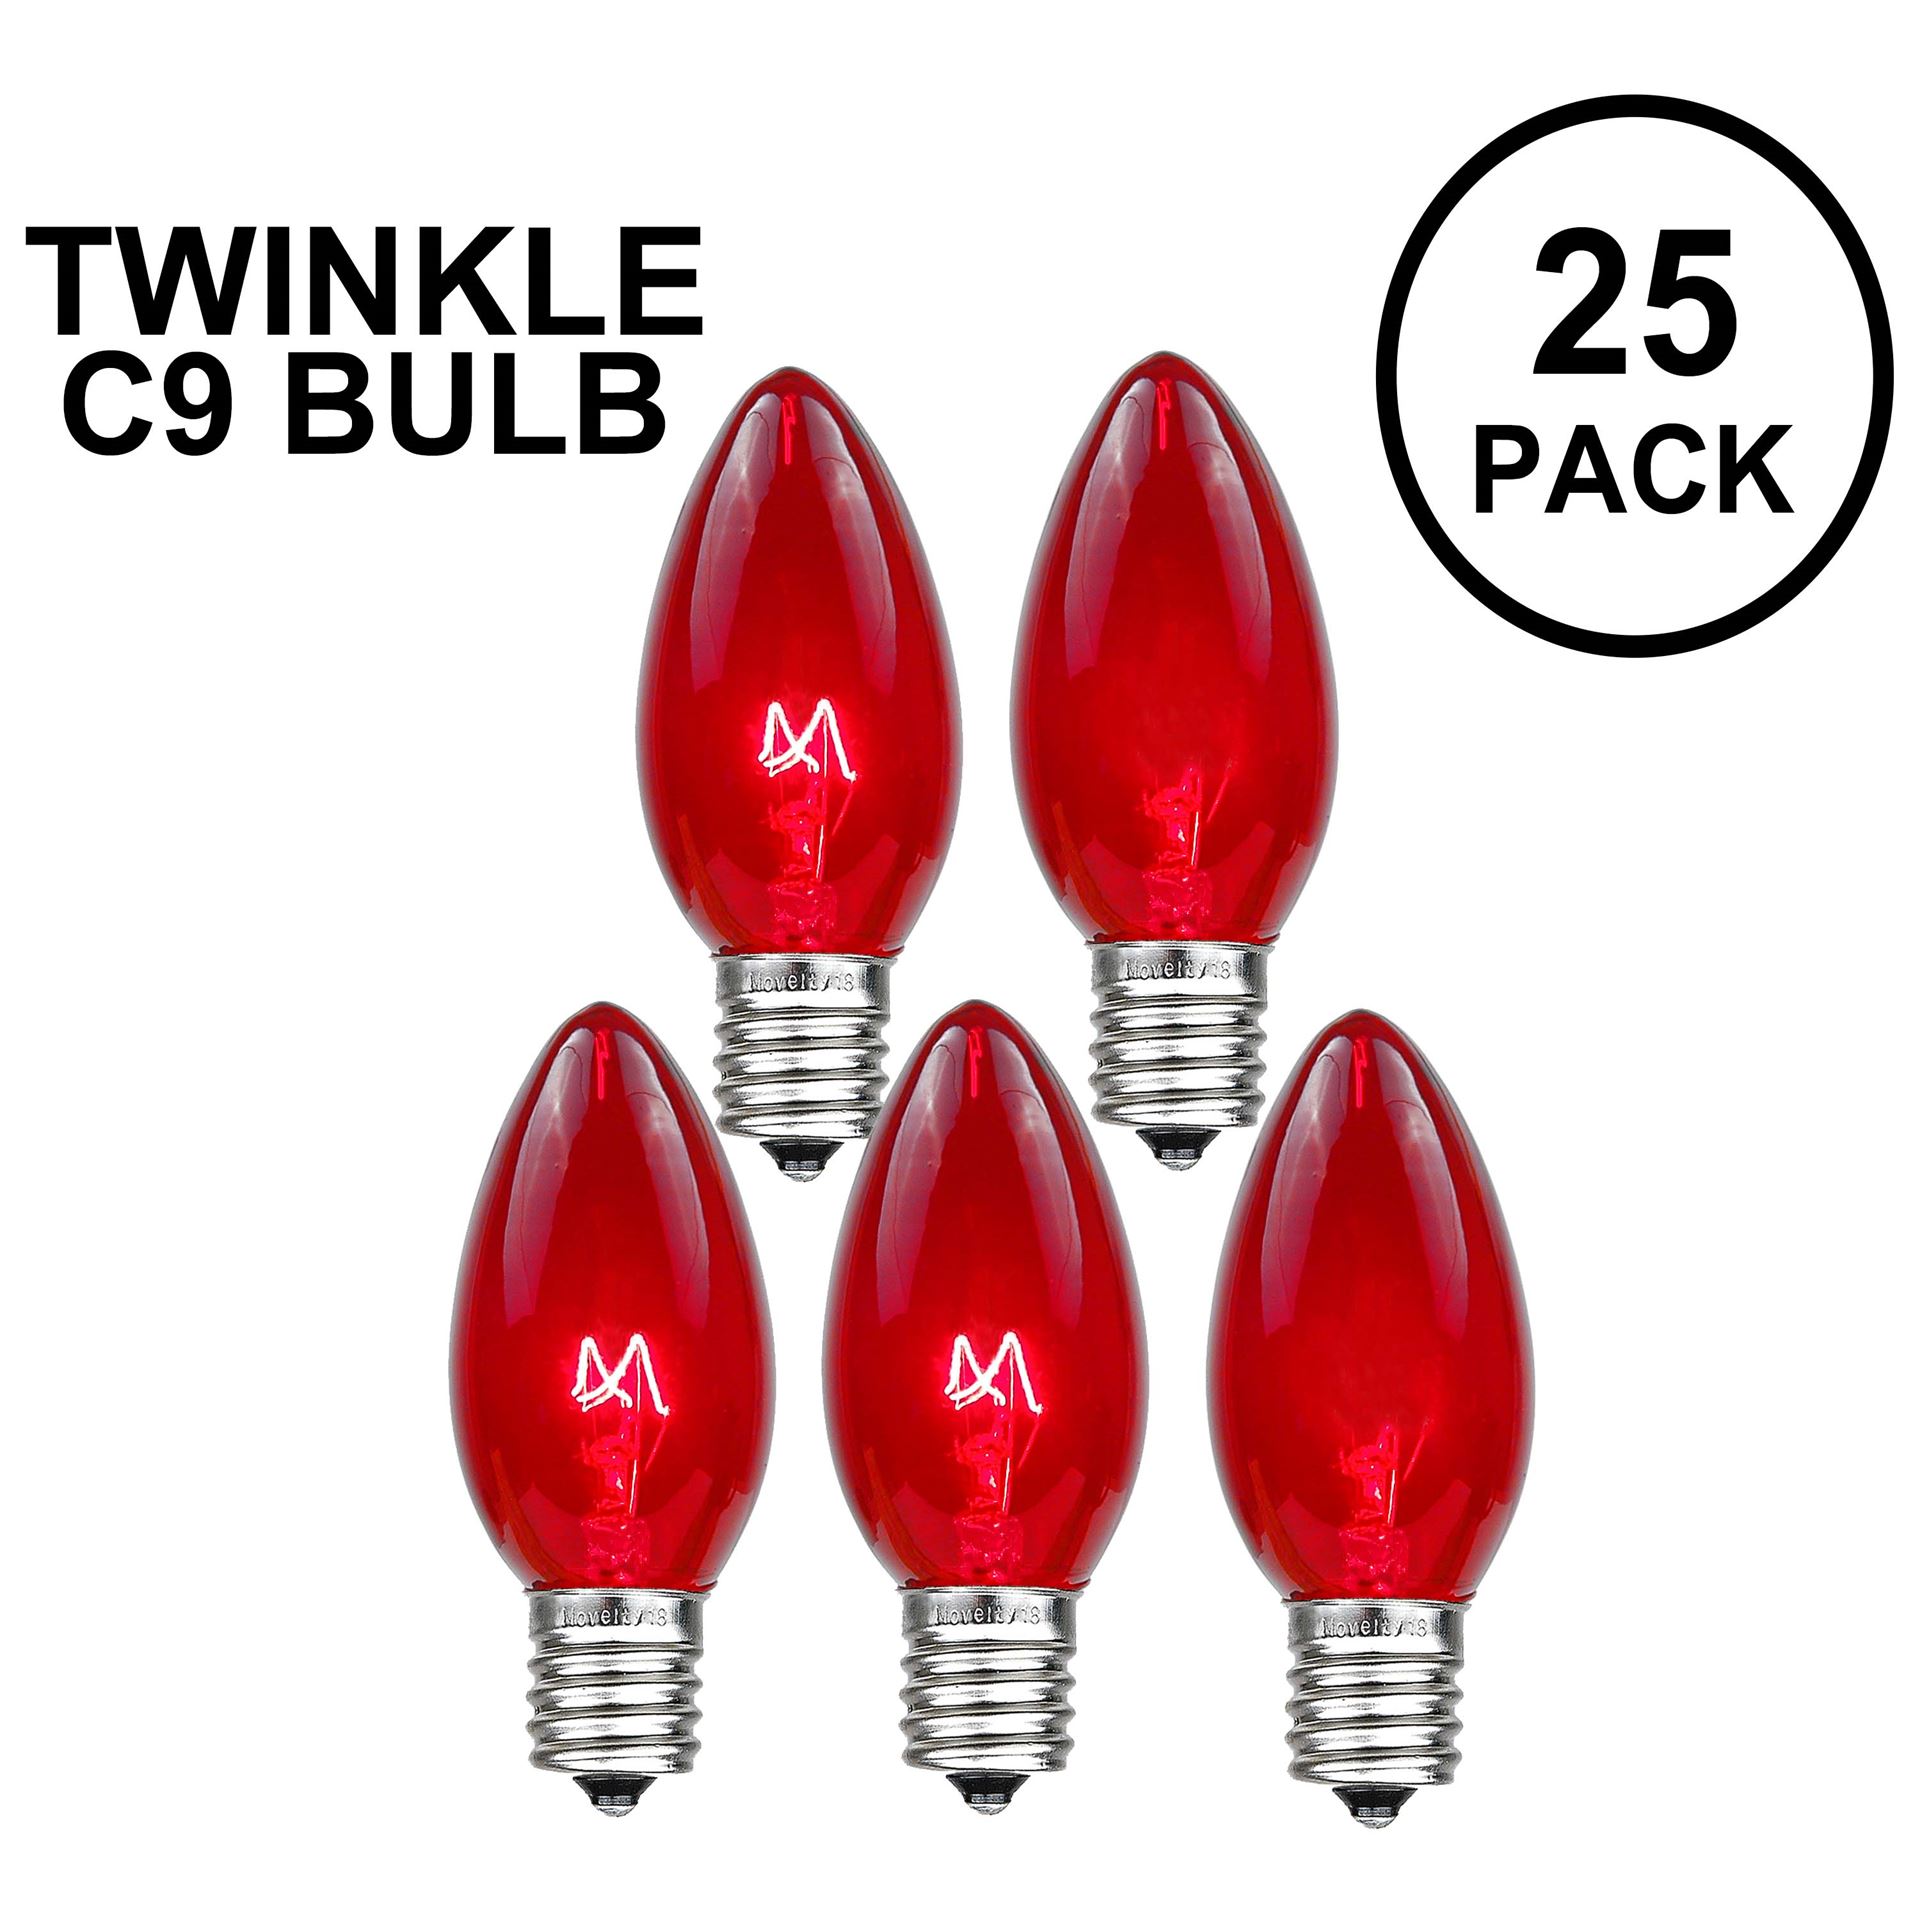 Picture of Red Twinkle C9 Bulbs 7 Watt Replacement Lamps 25 Pack